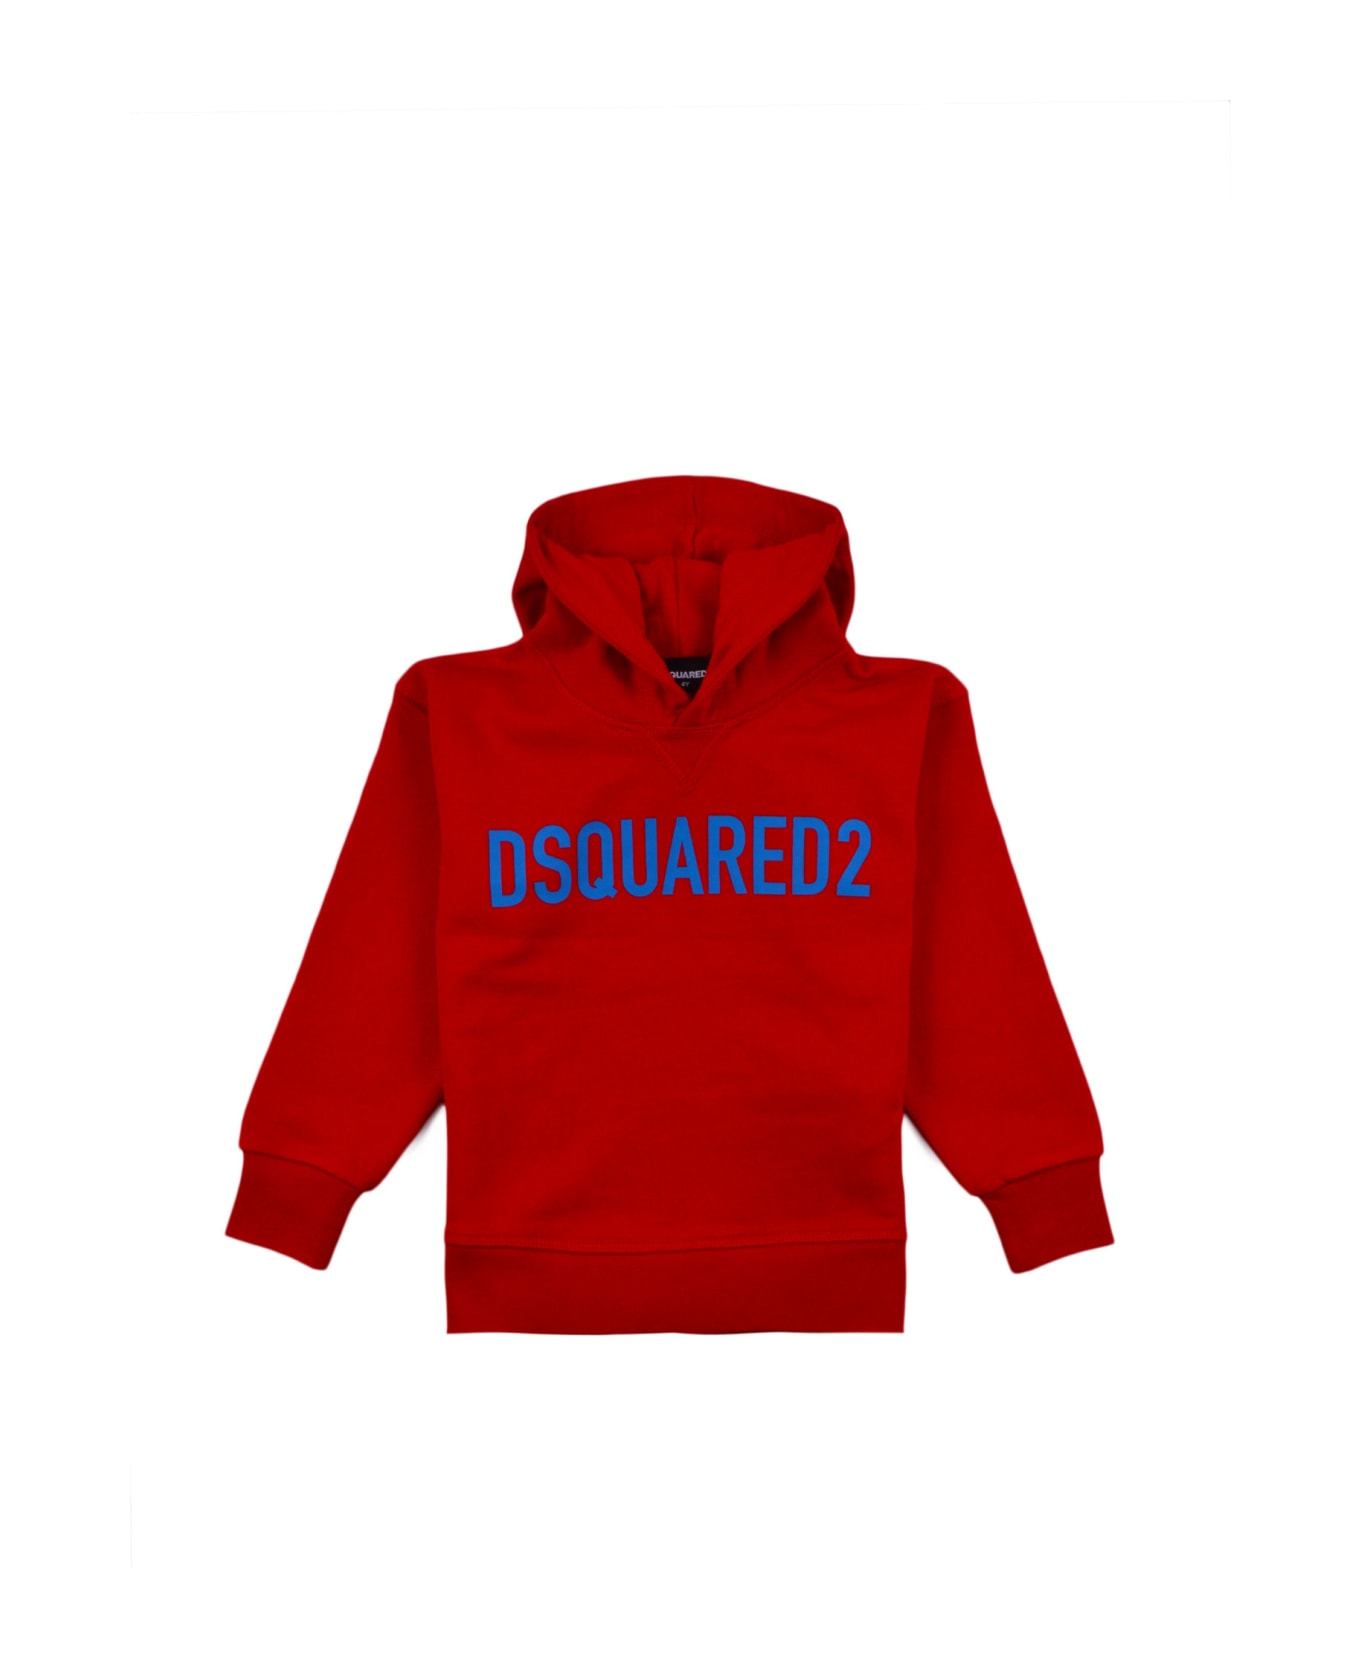 Dsquared2 Cotton Sweatshirt With Hood - Red